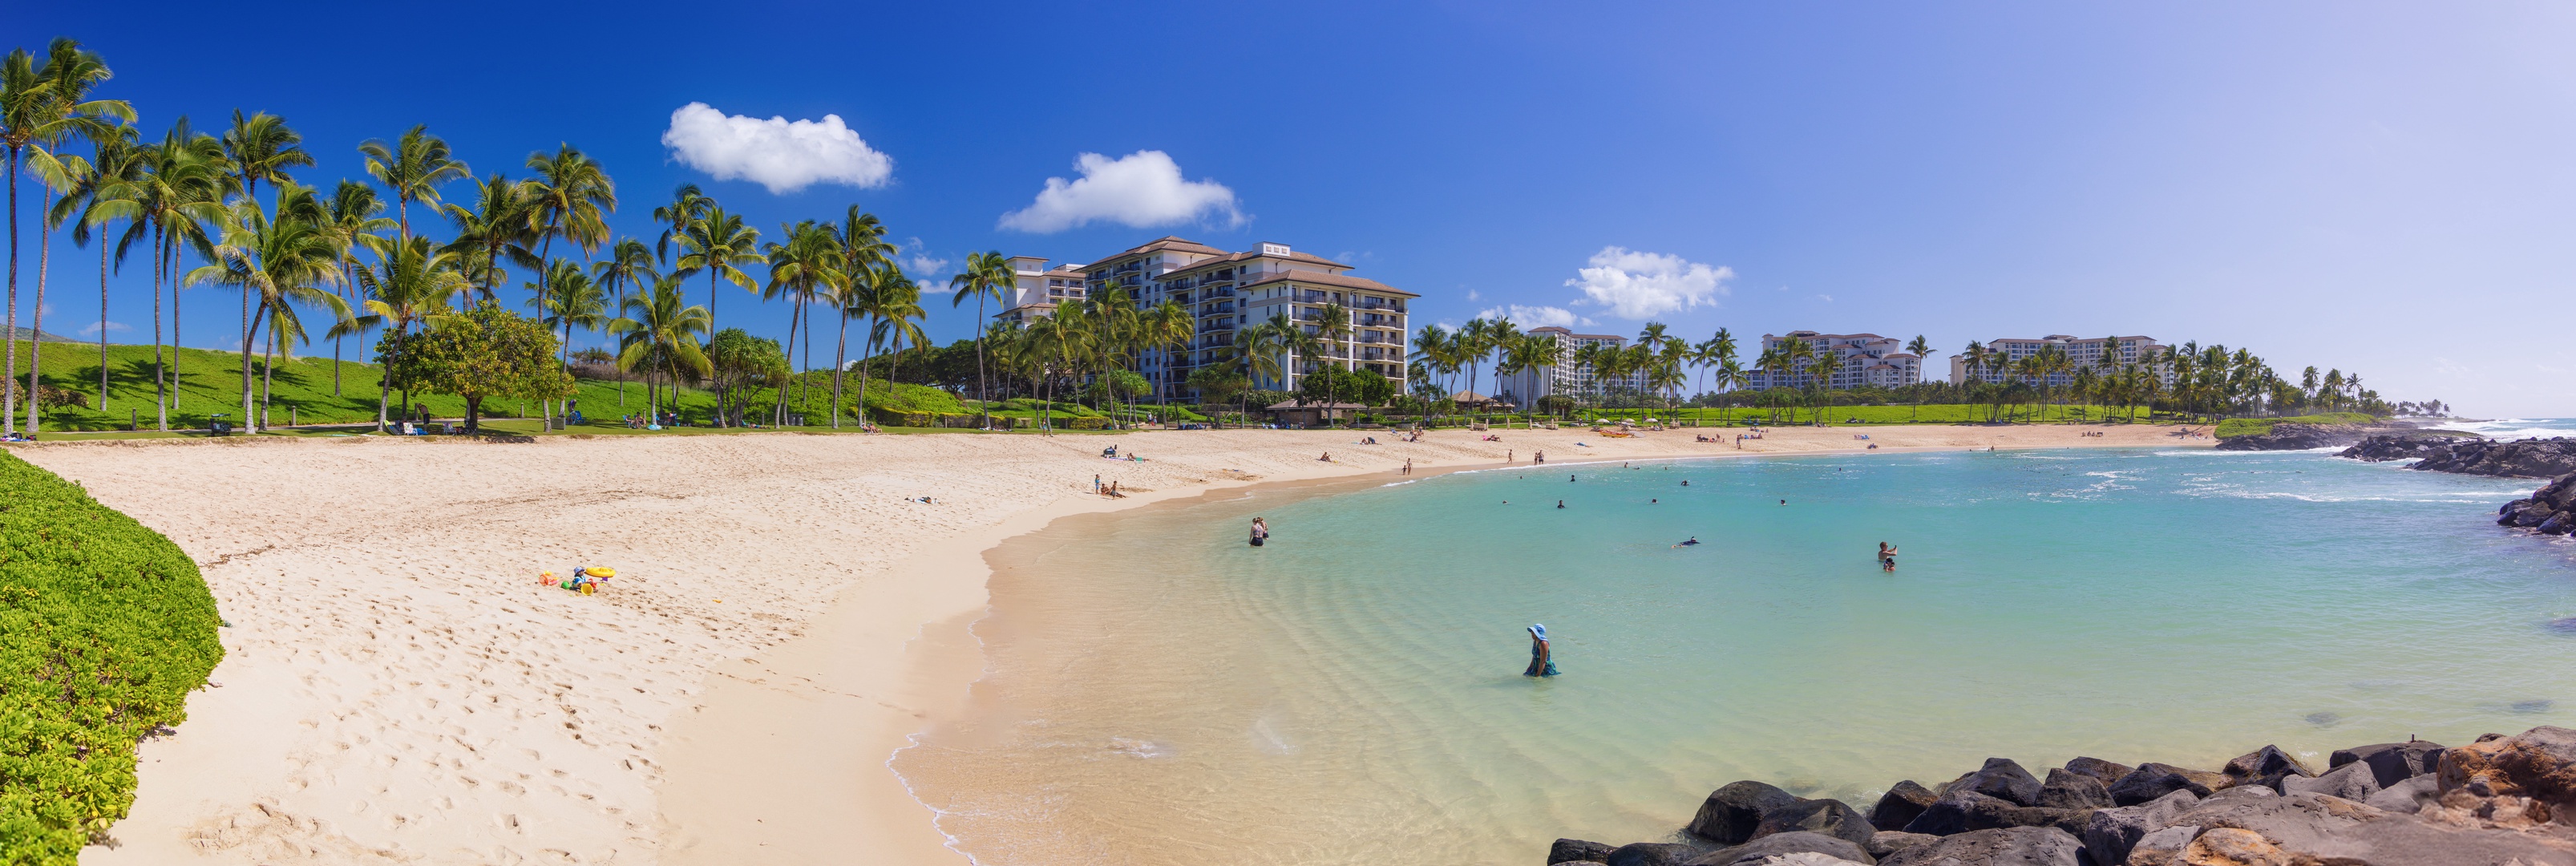 Kapolei Vacation Rentals, Ko Olina Kai 1105E - The private lagoon at Ko Olina is the perfect place for a relaxing afternoon in the sun.